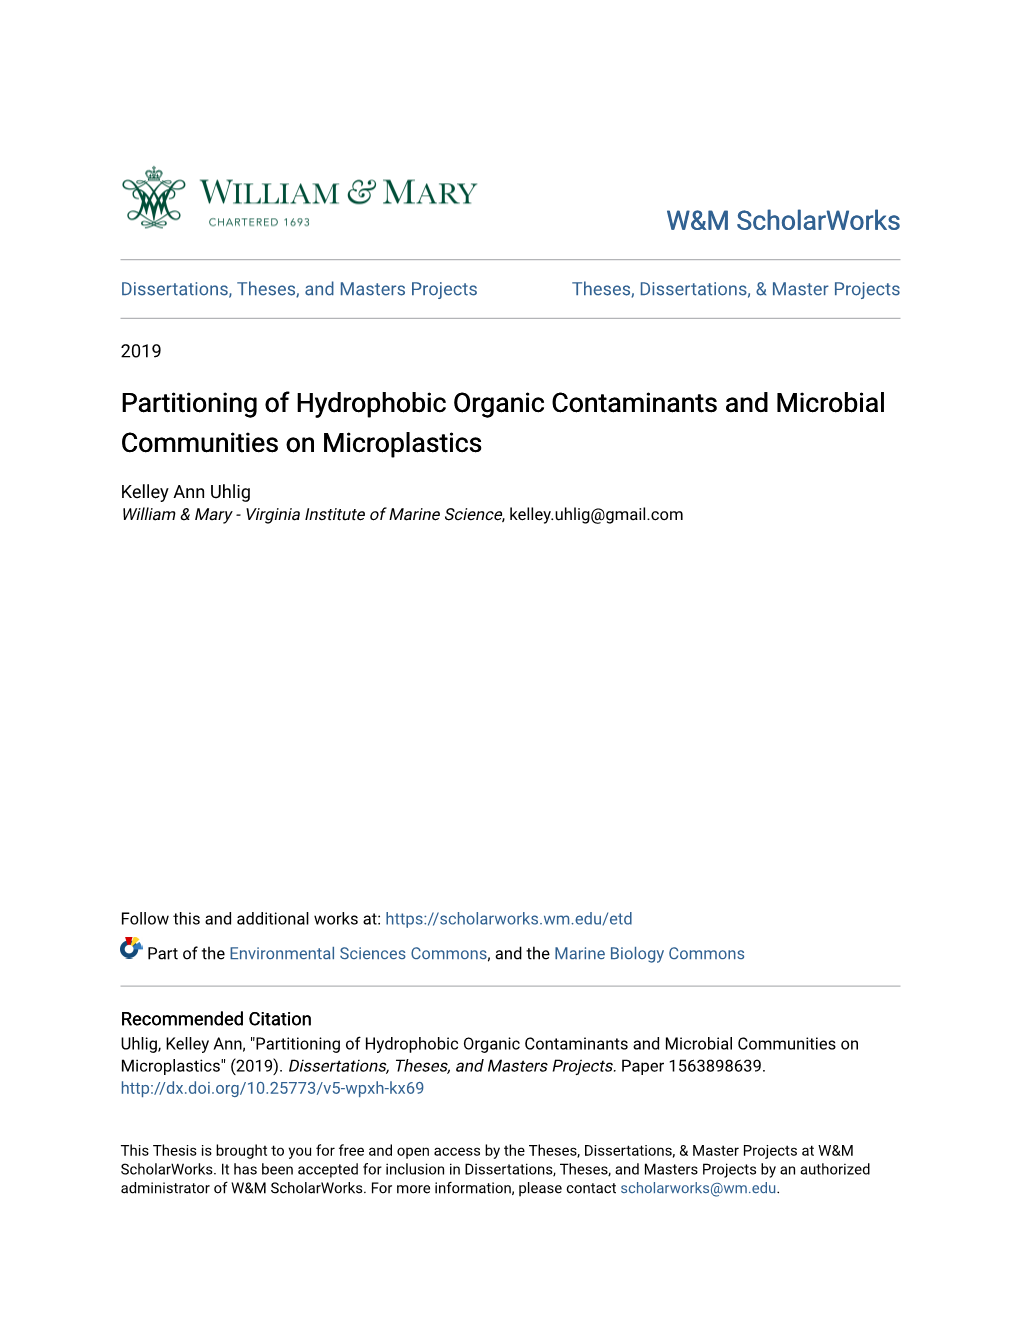 Partitioning of Hydrophobic Organic Contaminants and Microbial Communities on Microplastics